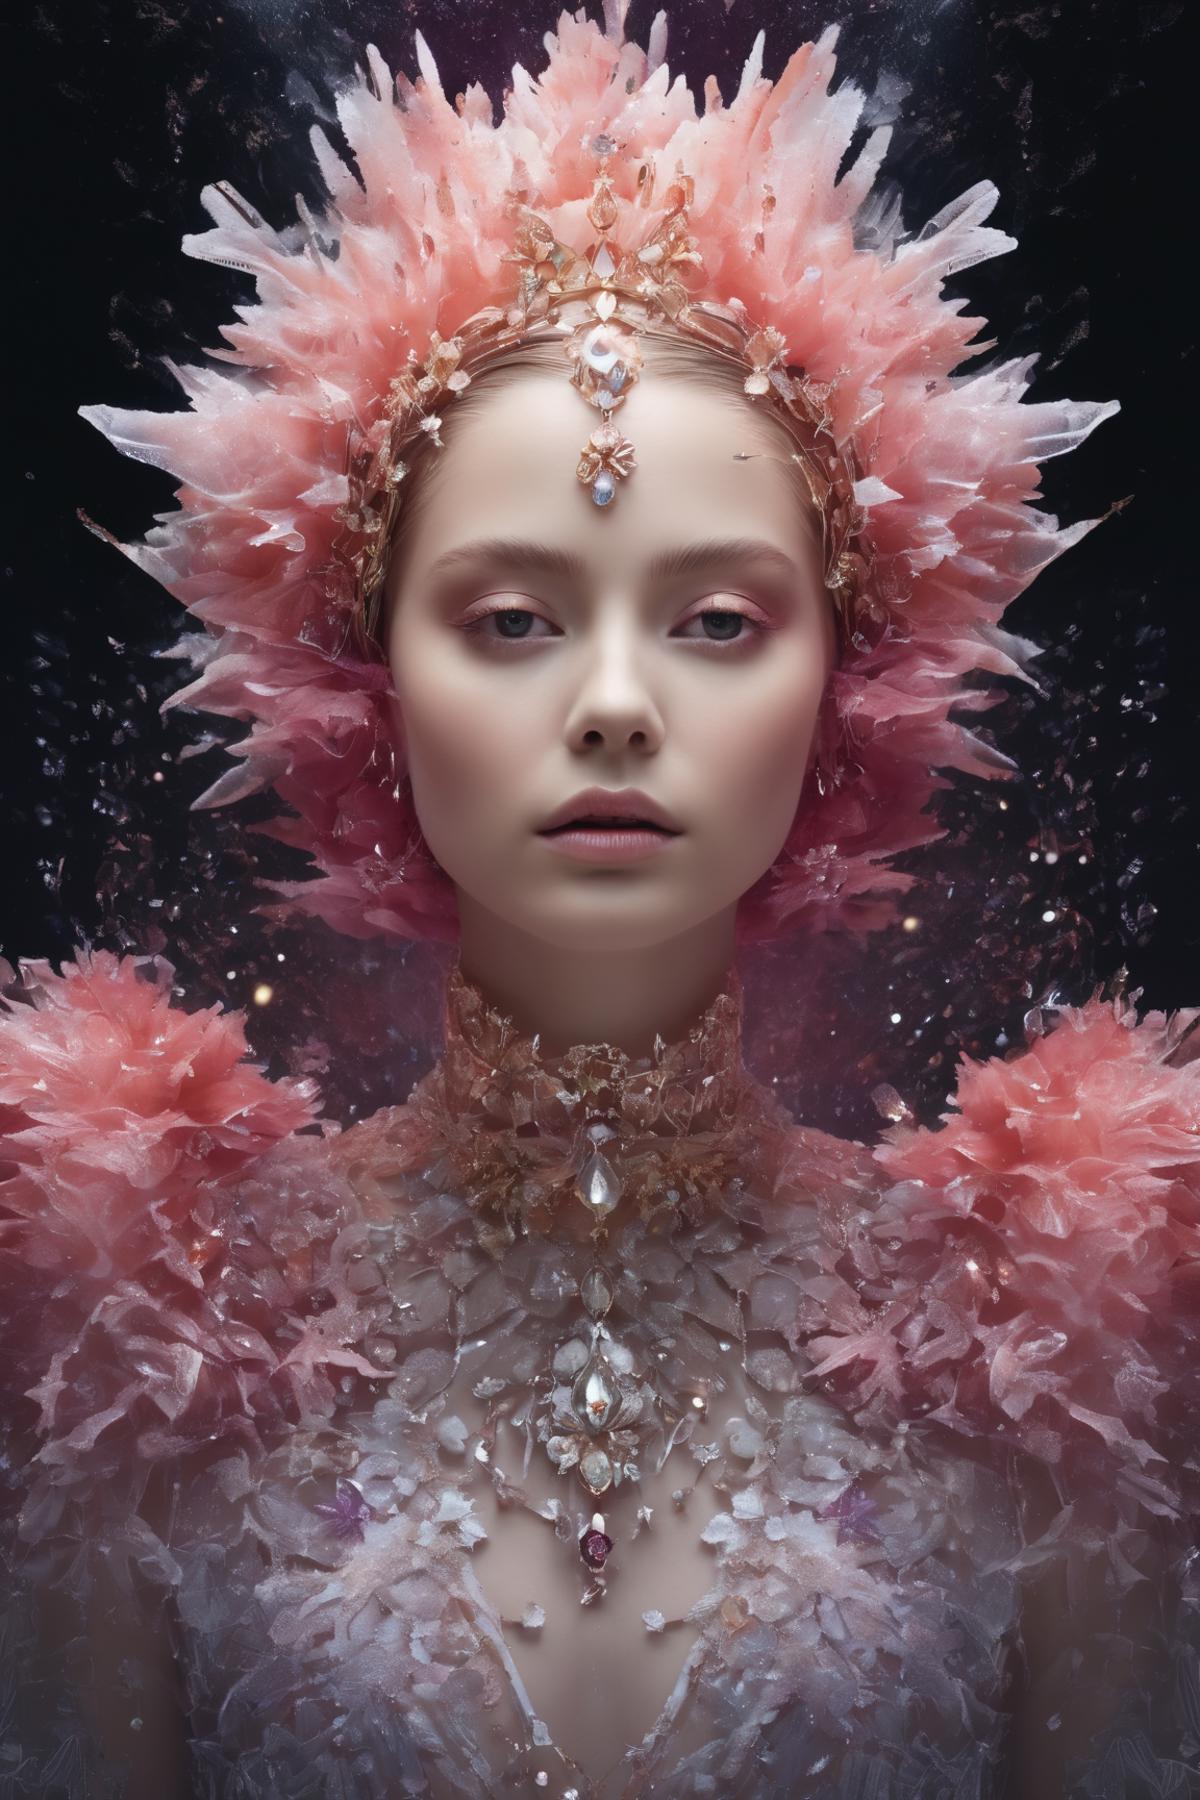 Woman with Pink Feather Headpiece and Shimmering Eye Makeup